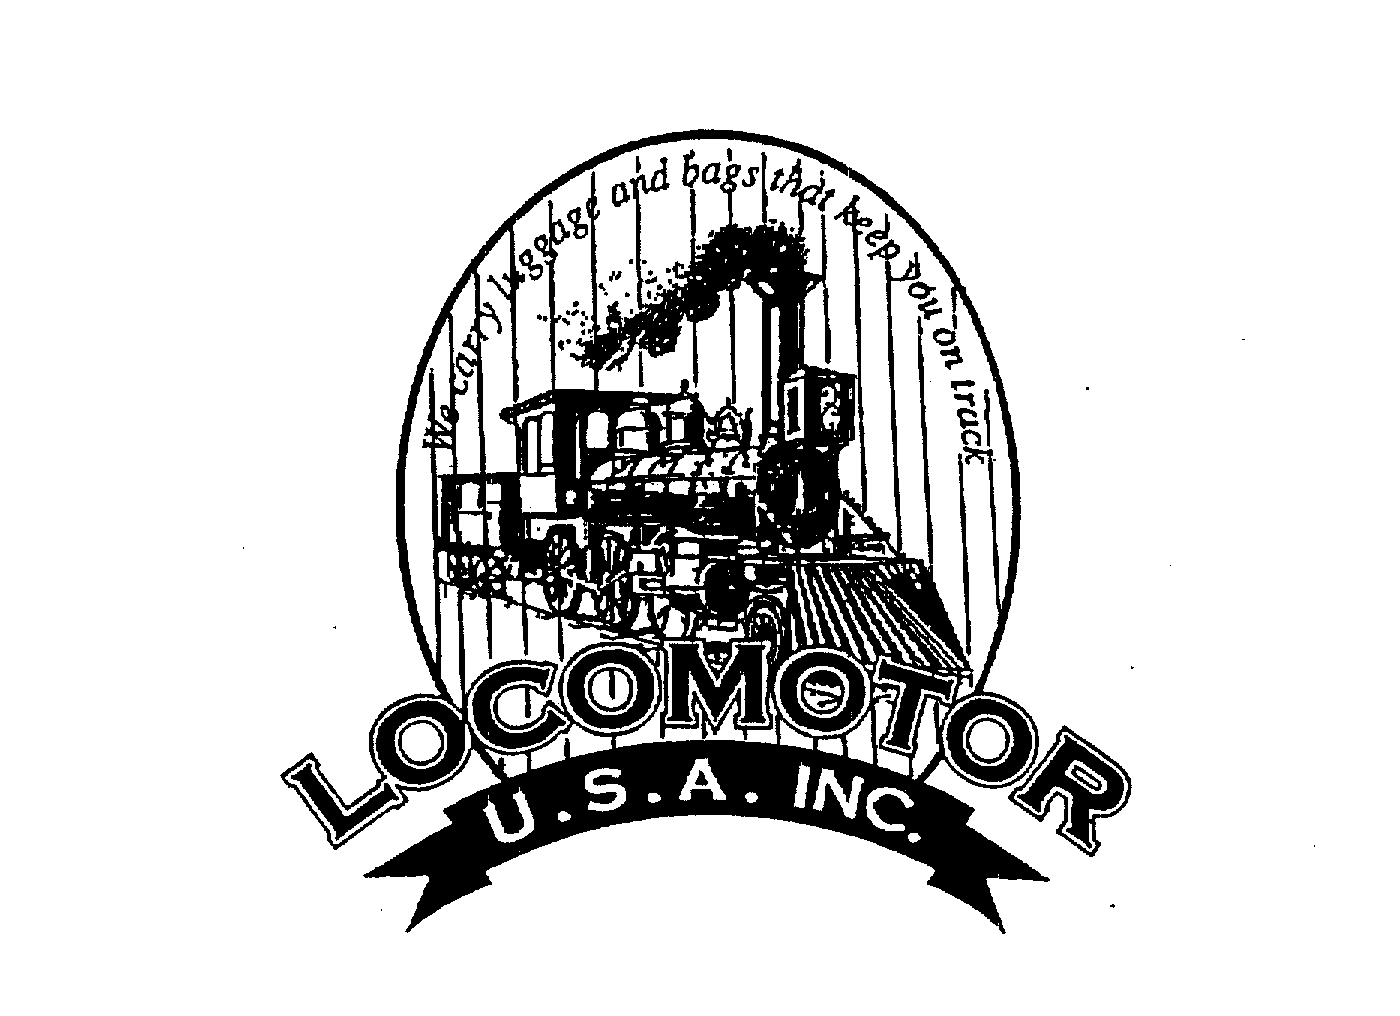  LOCOMOTOR U.S.A. INC. WE CARRY LUGGAGE AND BAGS THAT KEEP YOU ON TRACK